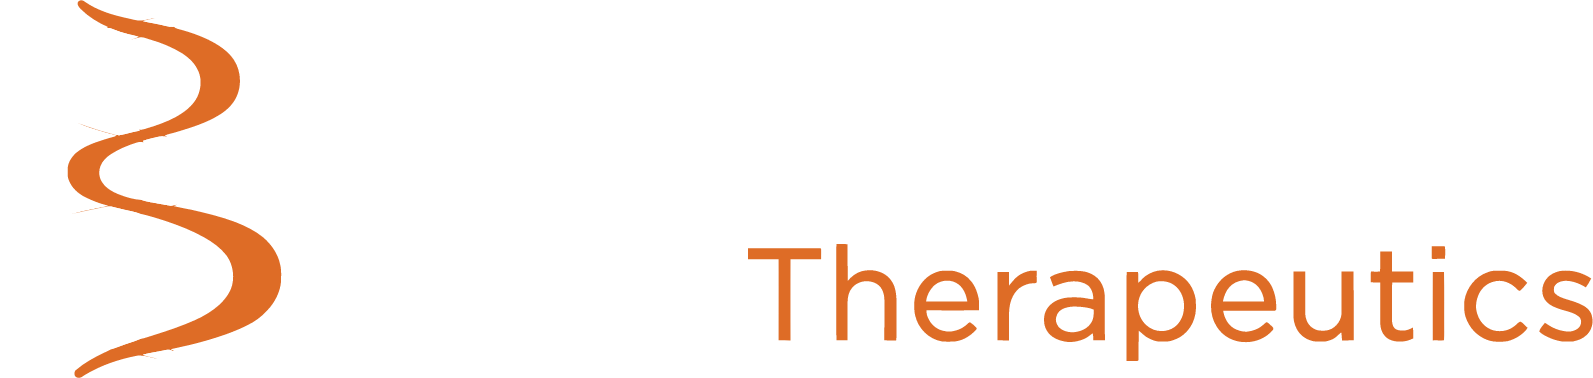 Protagonist Therapeutics
 logo large for dark backgrounds (transparent PNG)